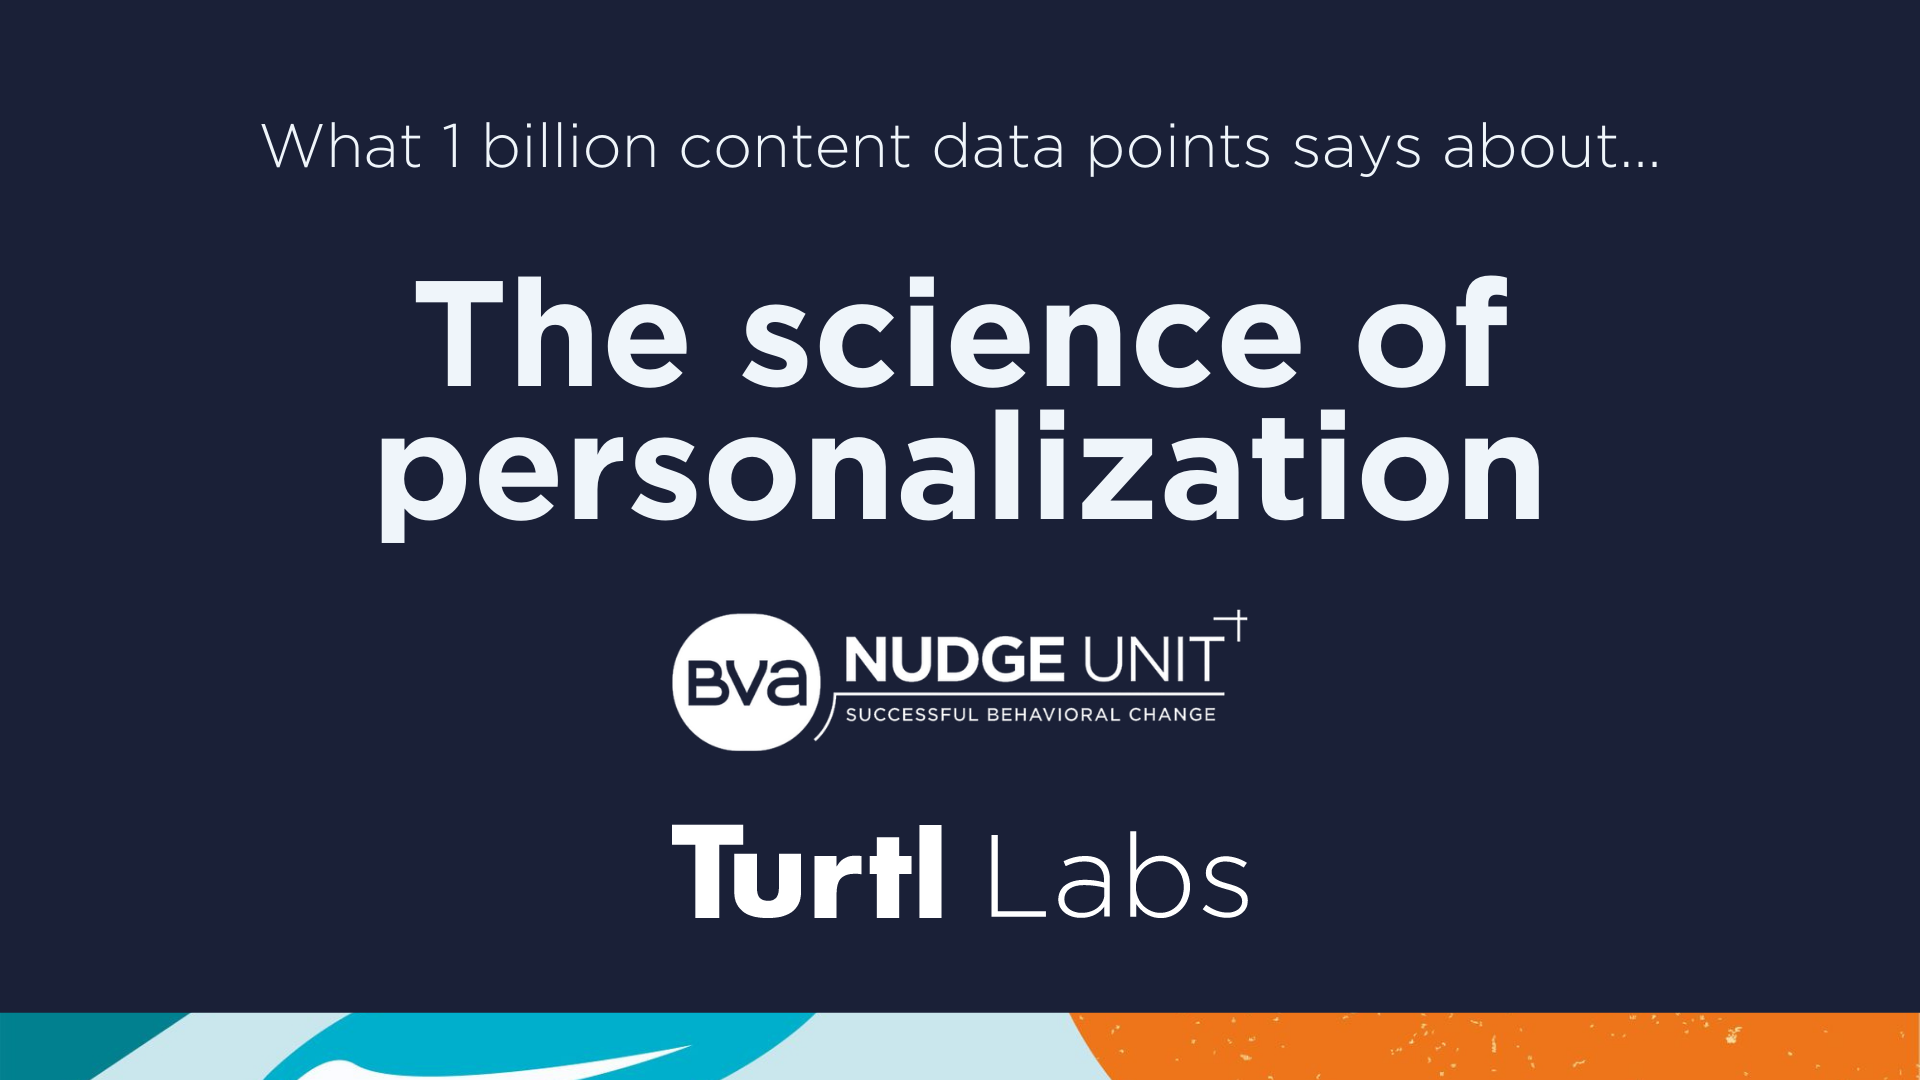 learn how to action personalization done right for marketers in our upcoming webinar